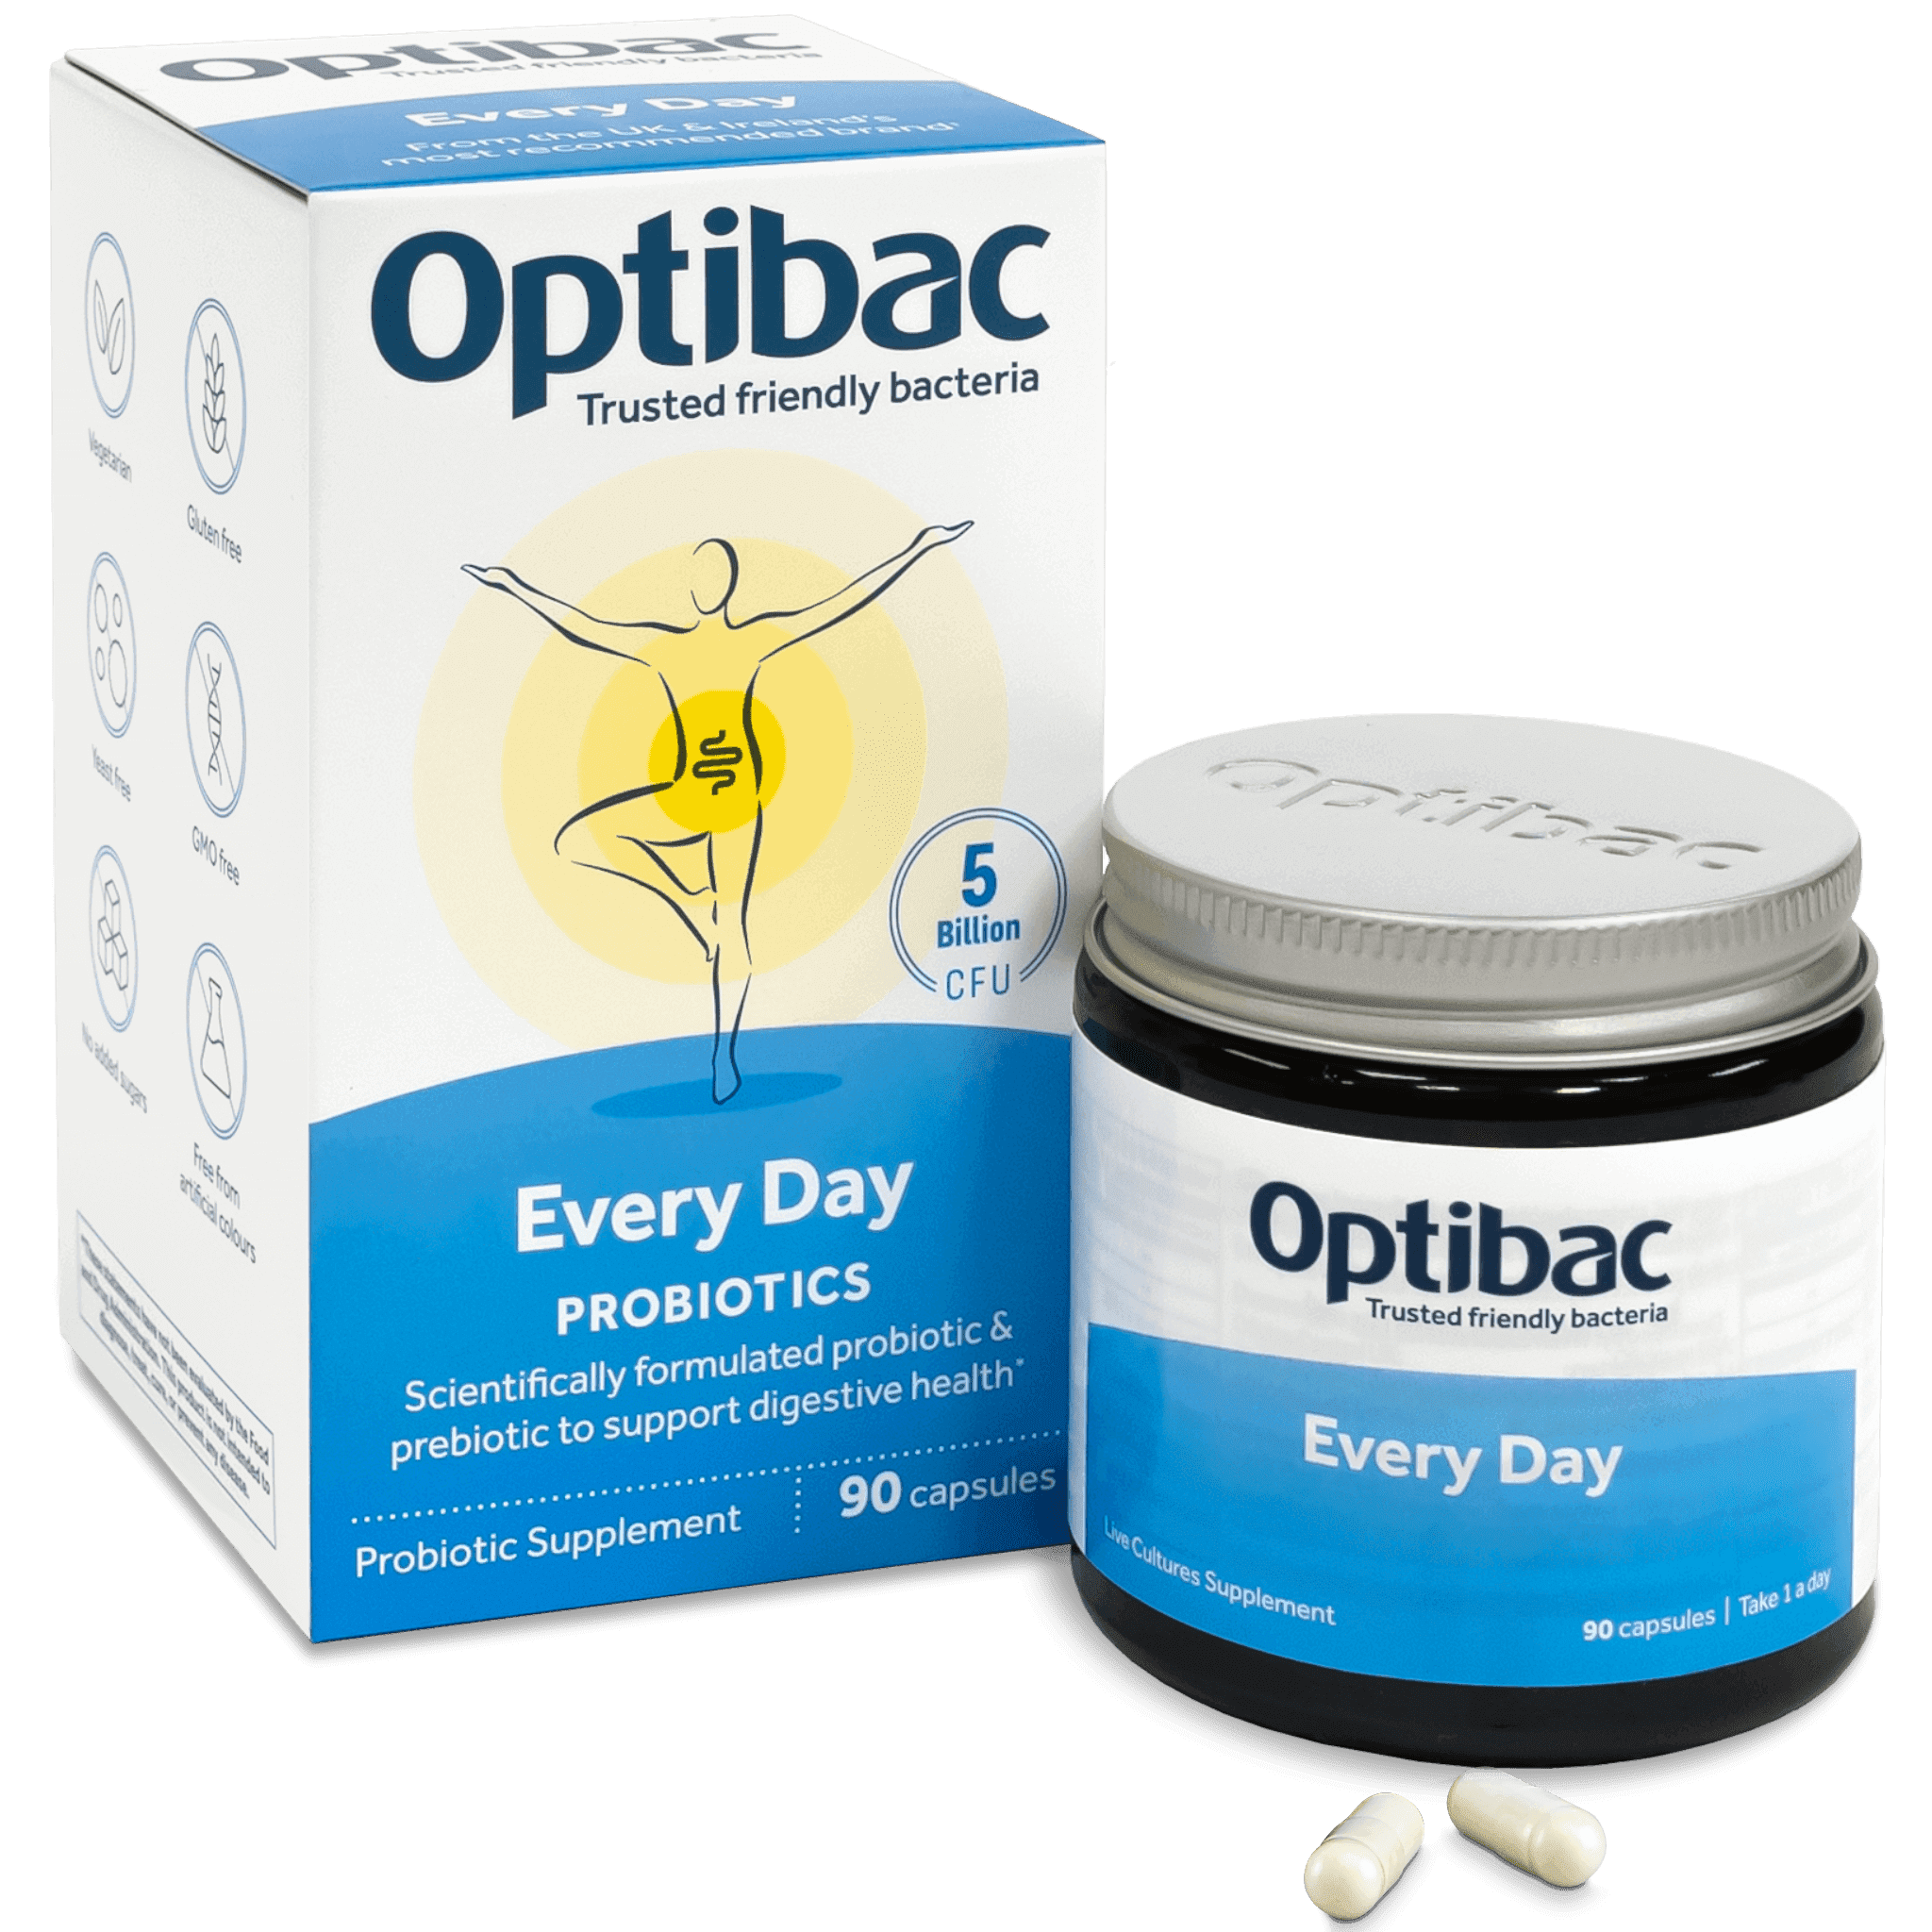 Optibac Probiotics Every Day (90 capsules) pack contents